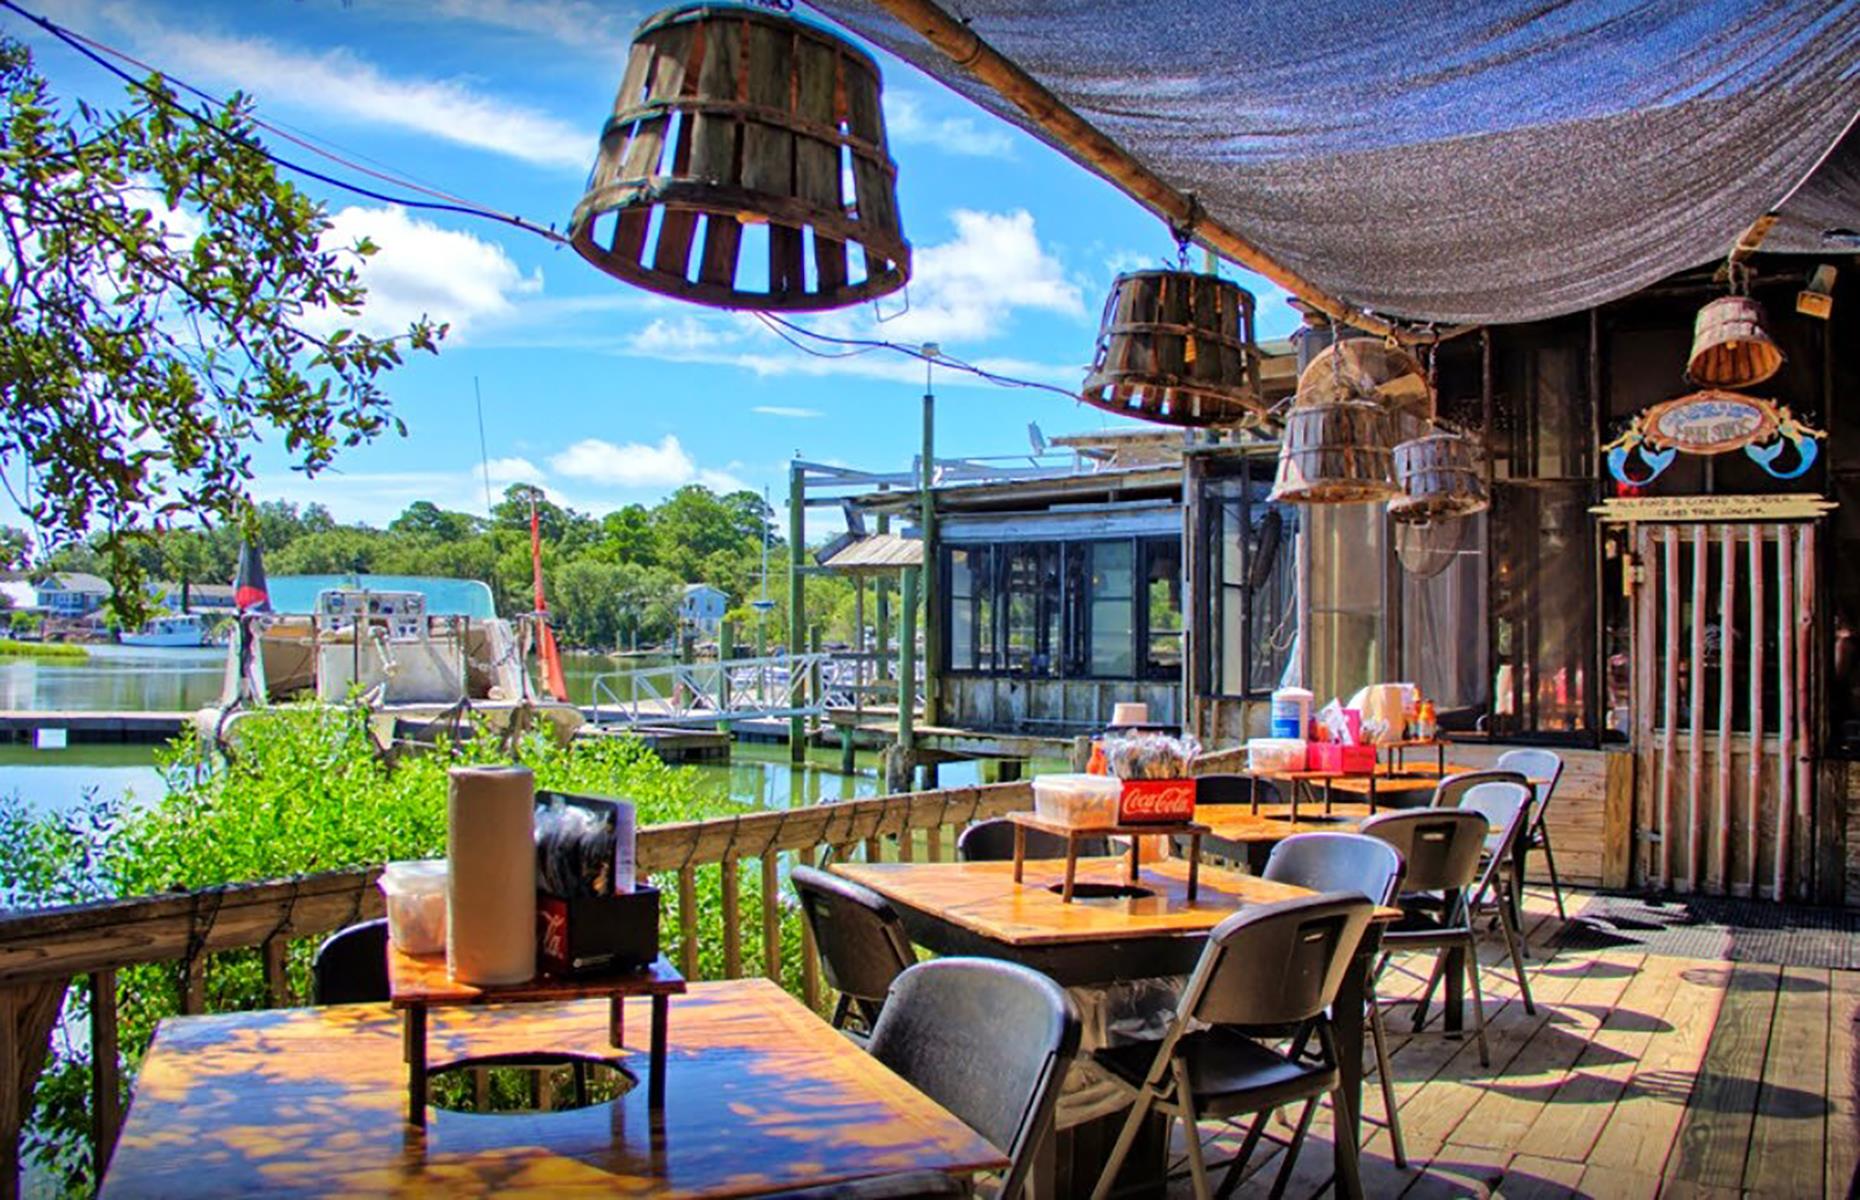 <p>What started as a modest seafood shack overlooking Chimney Creek is now <a href="http://thecrabshack.com/">a Tybee Island institution</a>. A casual attitude – their motto is "where the elite eat in bare feet" – and <a href="https://www.tripadvisor.co.uk/ShowUserReviews-g35328-d436975-r721553649-The_Crab_Shack-Tybee_Island_Georgia.html">some supremely good seafood</a> make this a place worth traveling for. Raw oysters and clam chowder are superb starters, while a snow crab boil with shrimp, corn and potatoes or a full platter of locally caught seafood will see away any rumbling stomachs. The spot is pet-friendly, so your pooch will enjoy the laid-back vibe and water views too. </p>